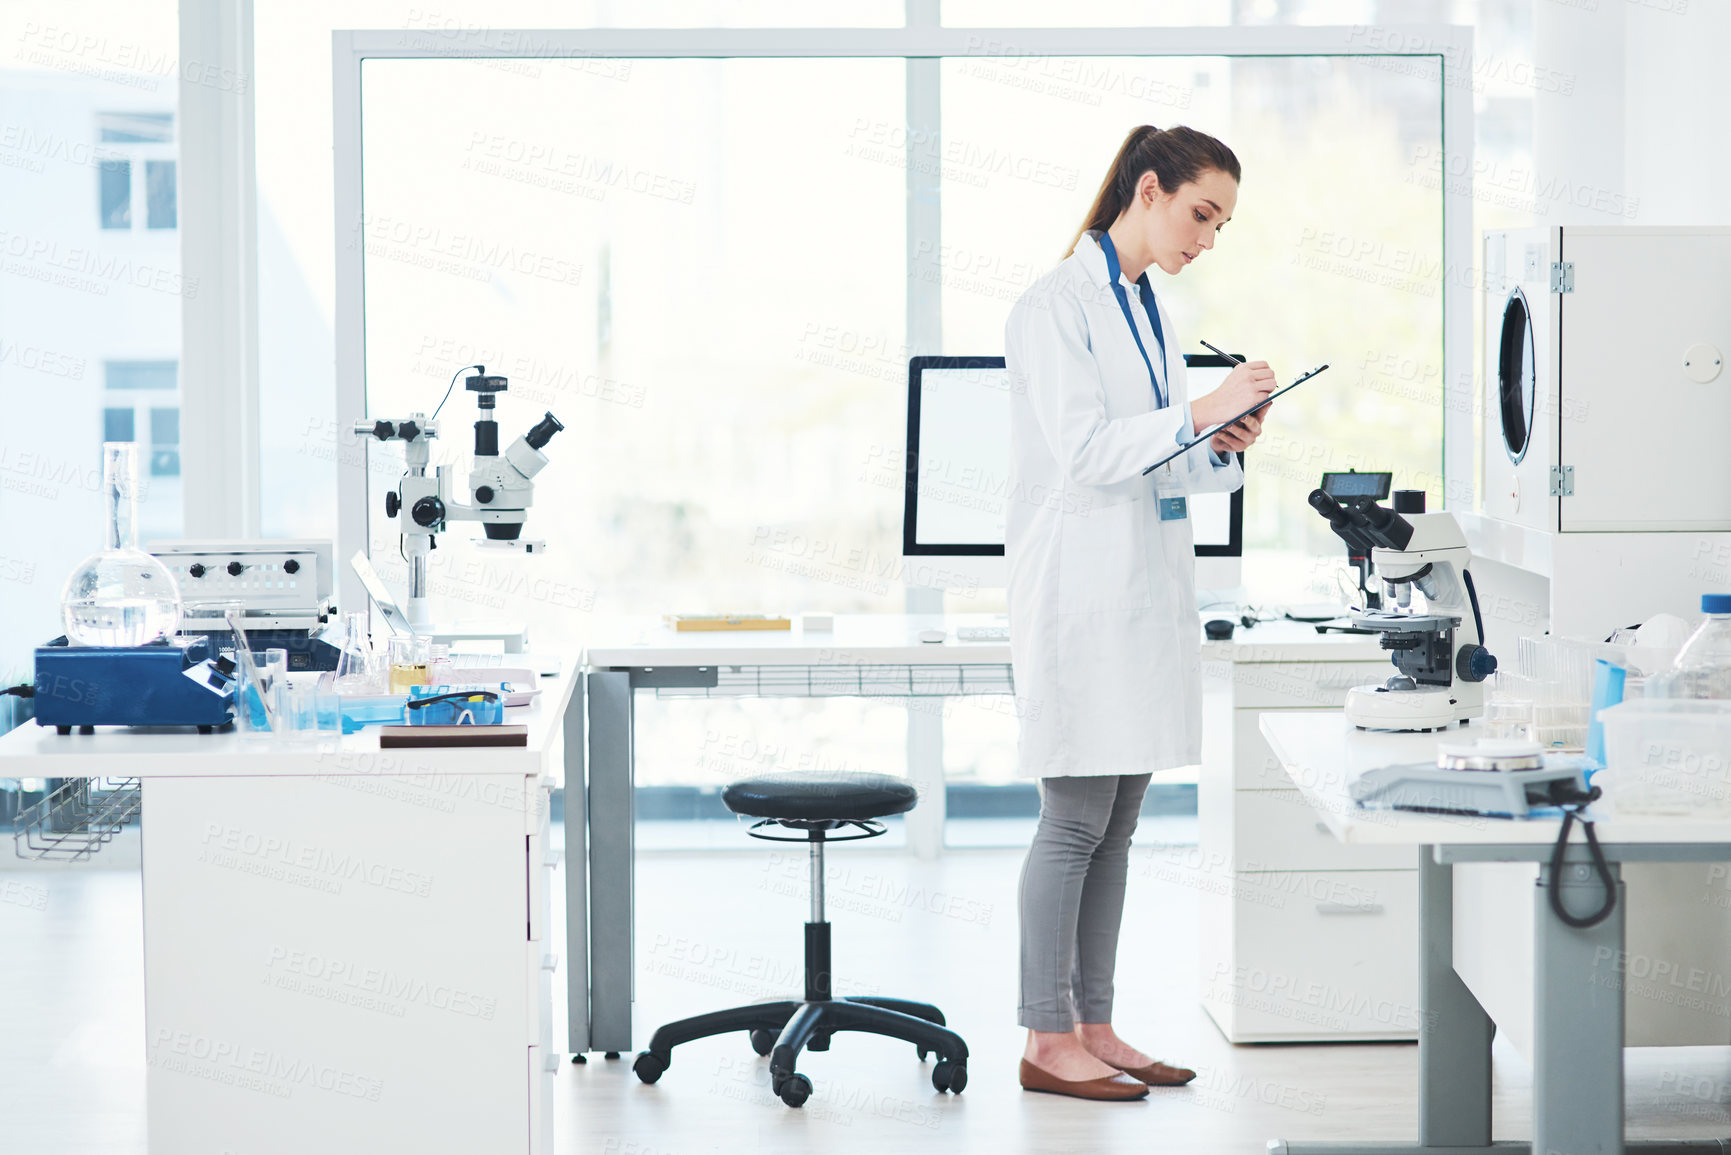 Buy stock photo Cropped shot of a focused young female scientist conducting experiments inside of a laboratory during the day